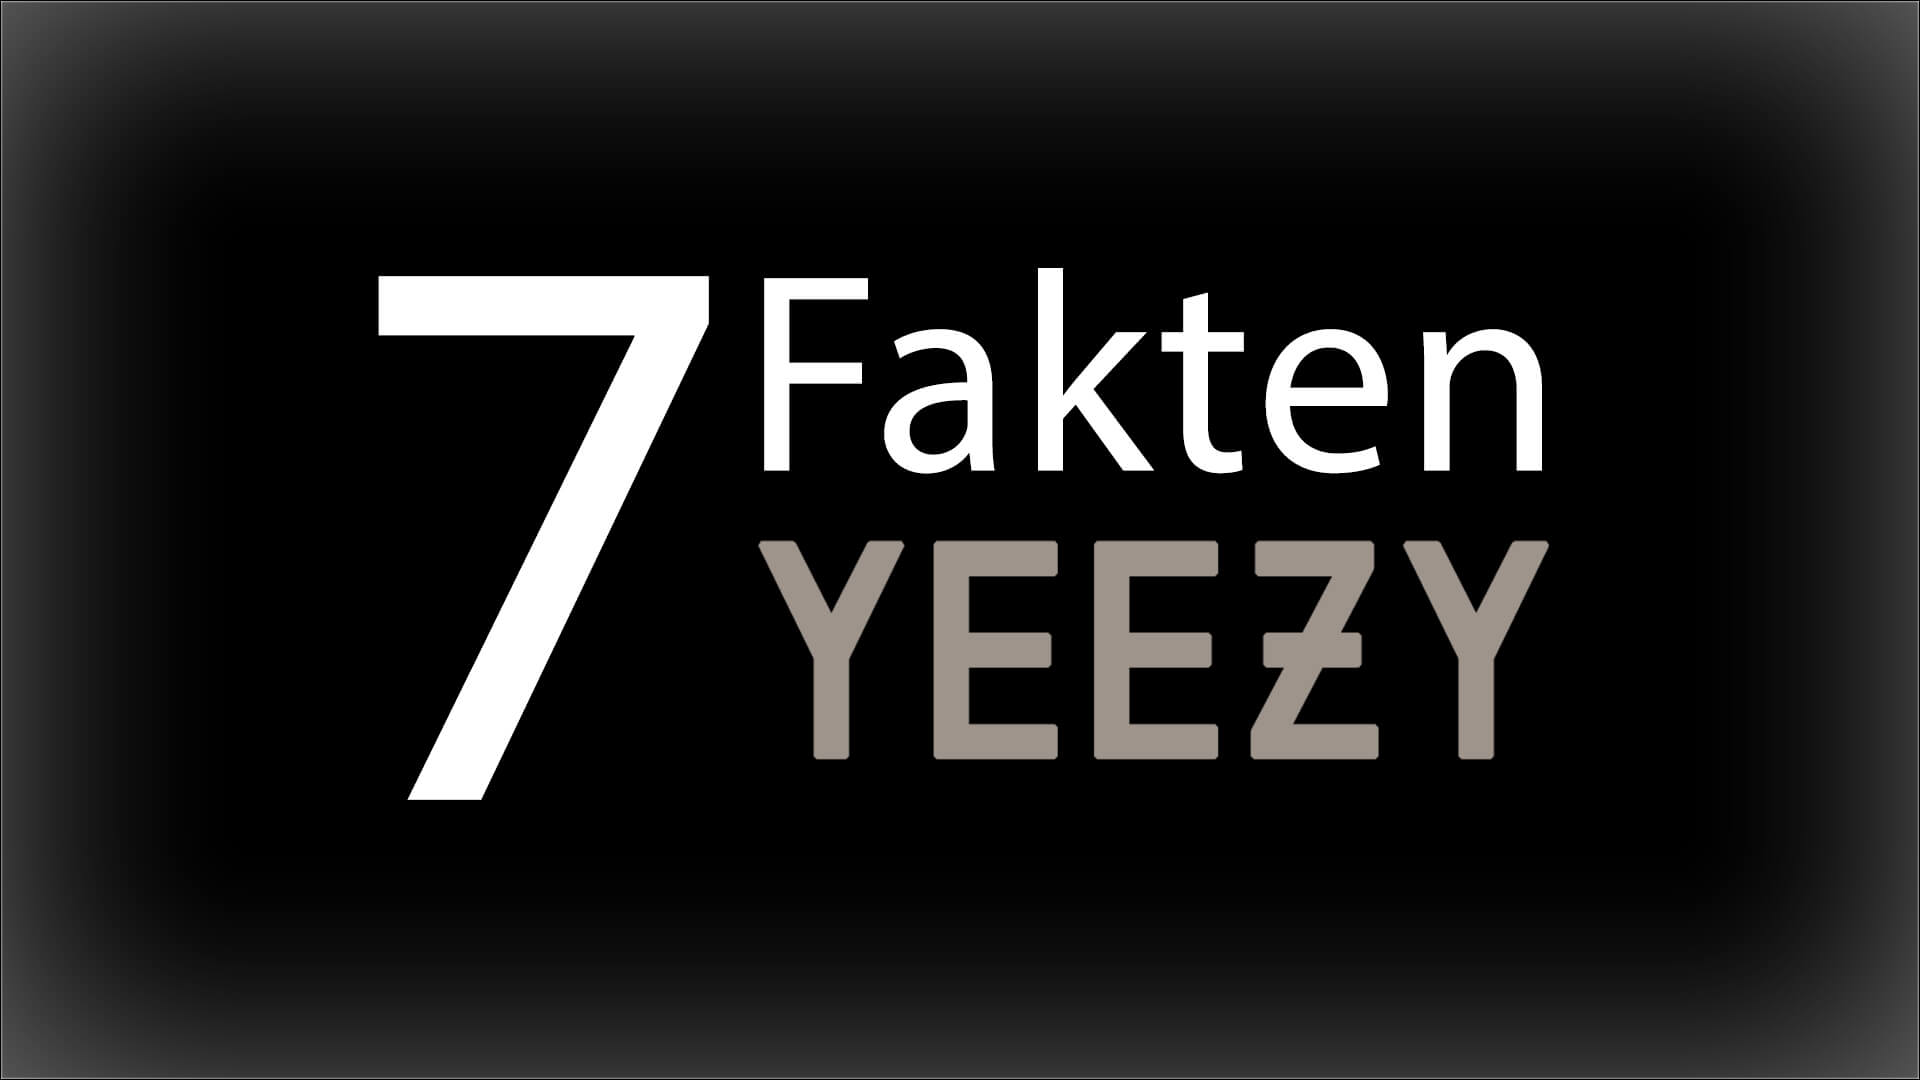 Sneaker Fun Facts – 7 Yeezy Facts